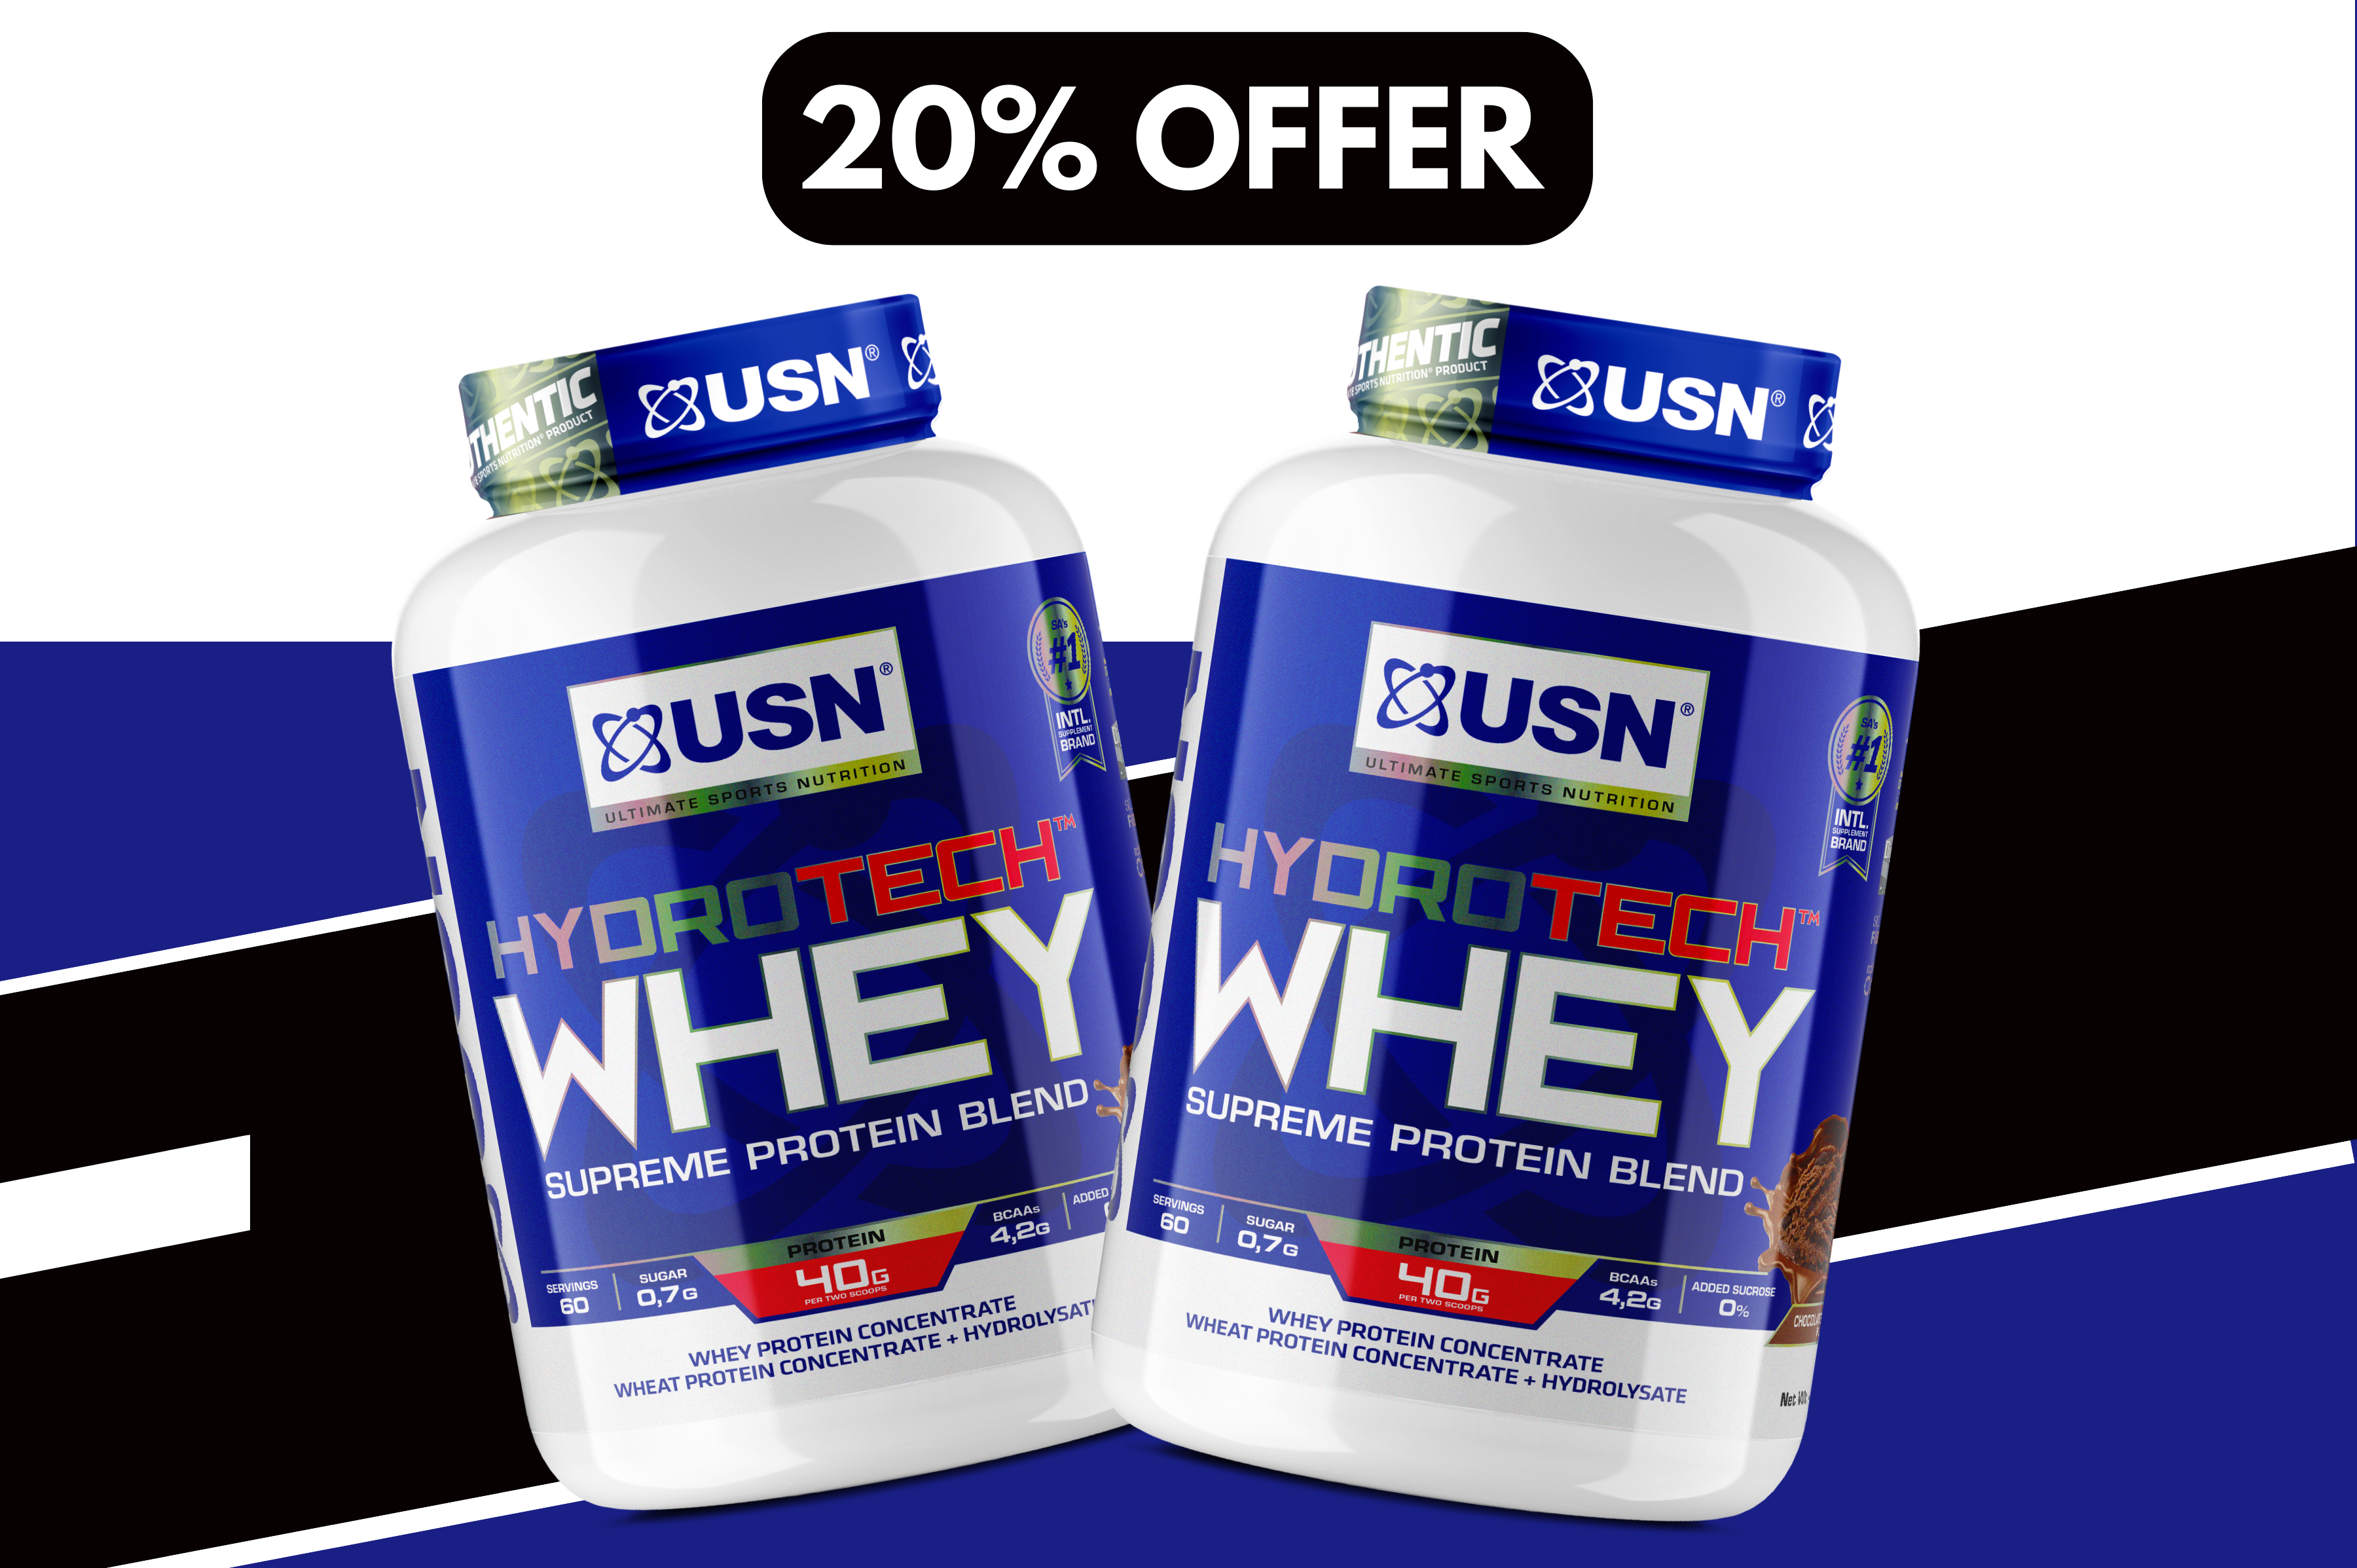 USN Hydrotech whey - pure ptotein blend